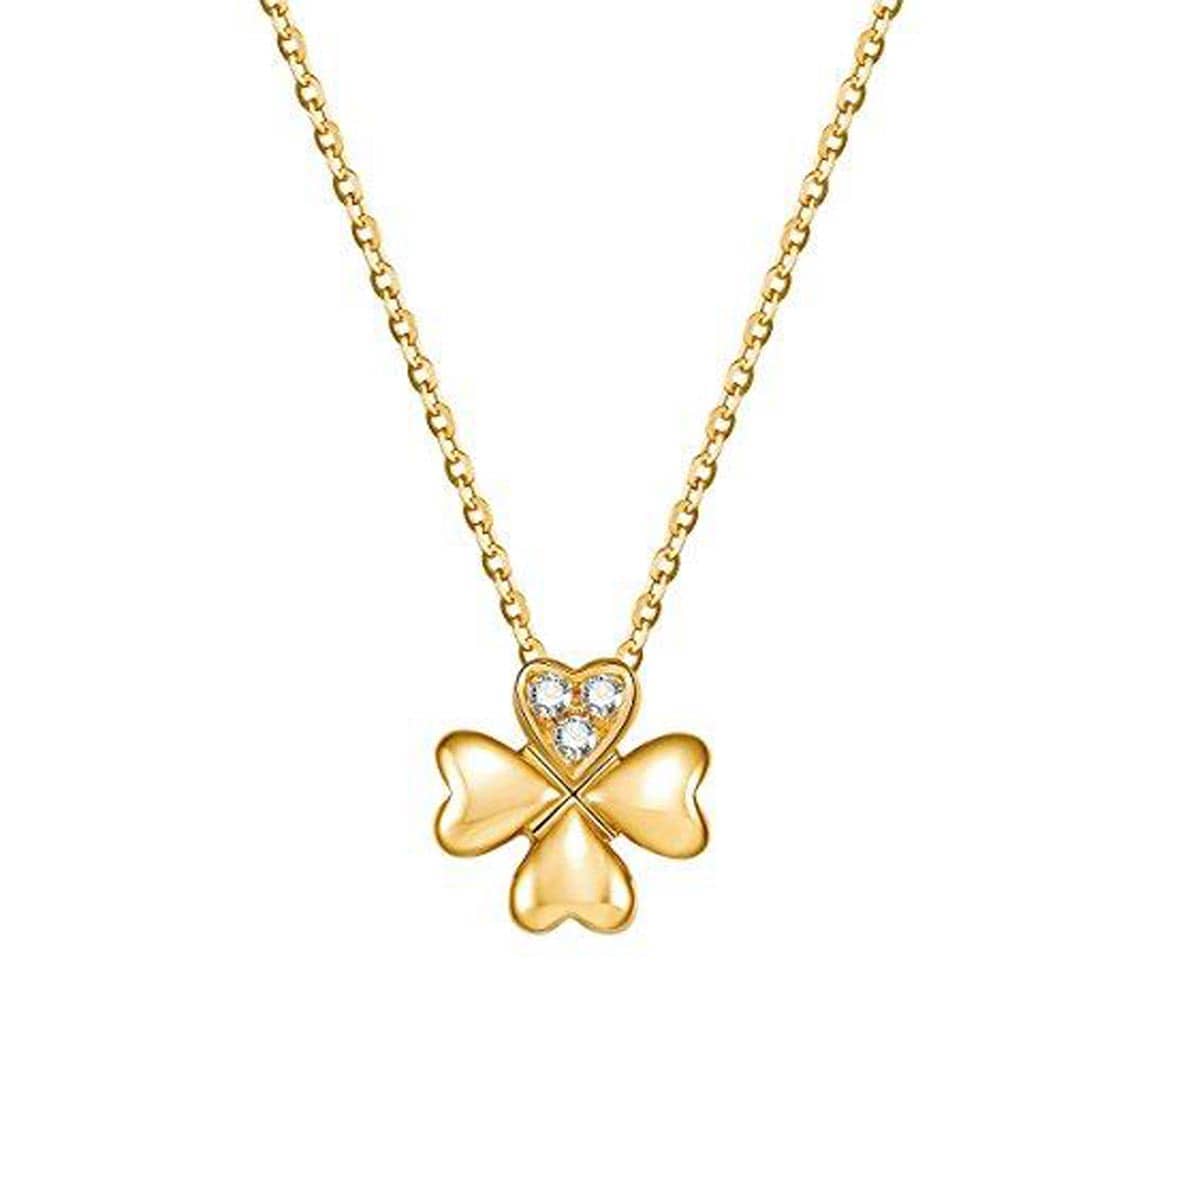 FANCIME "Lucky Clover" Floral 18K Yellow Gold Necklace Main